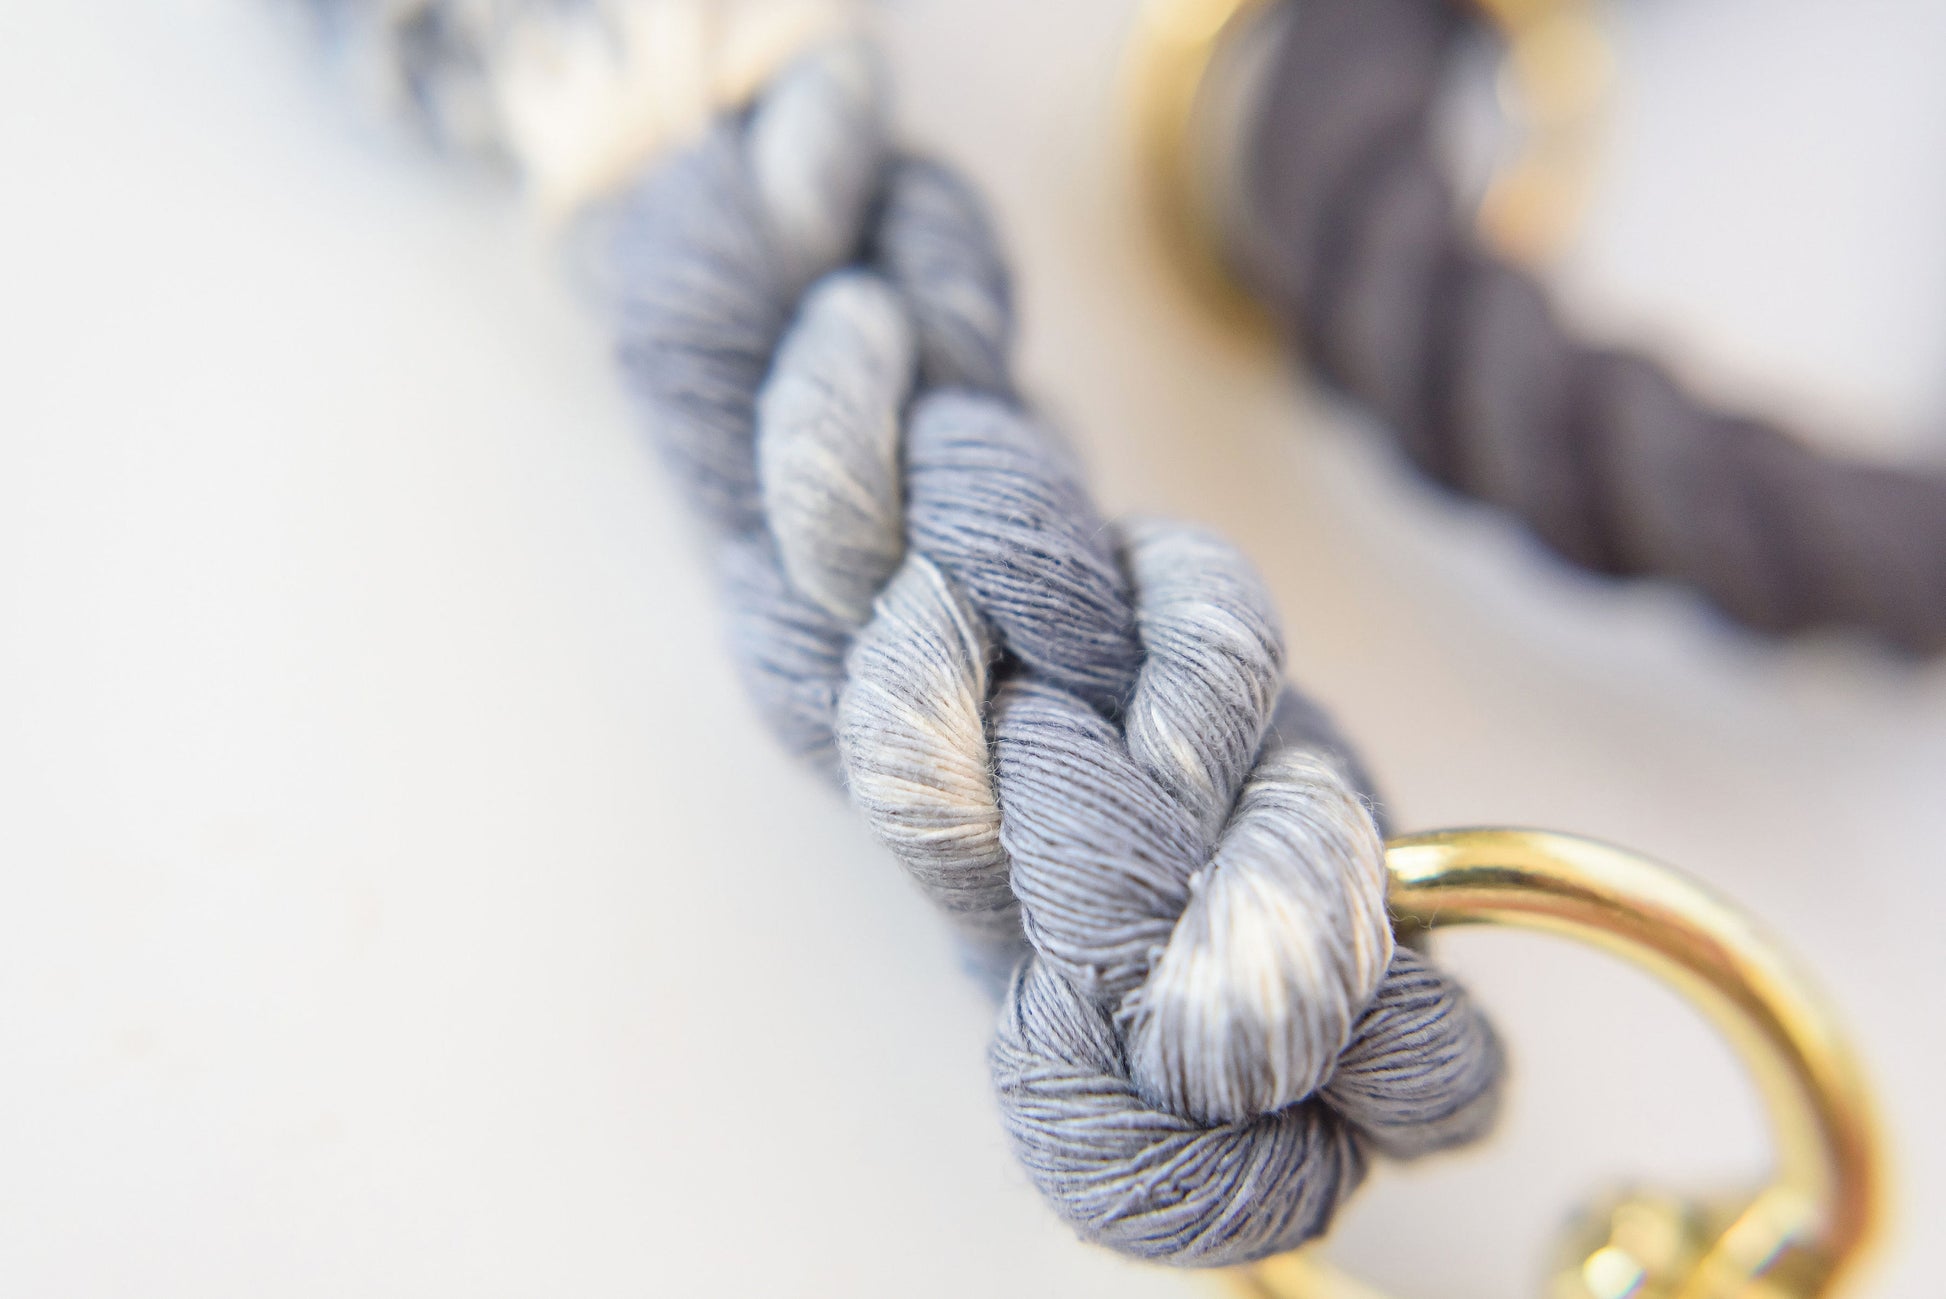 Ombré Grey Cotton Rope Leash - Cute Dog Leash - Dog Gift - Gift for Her - Pet Birthday Gift - Dog Accessory - Dog Lover Gift - Wedding Leash